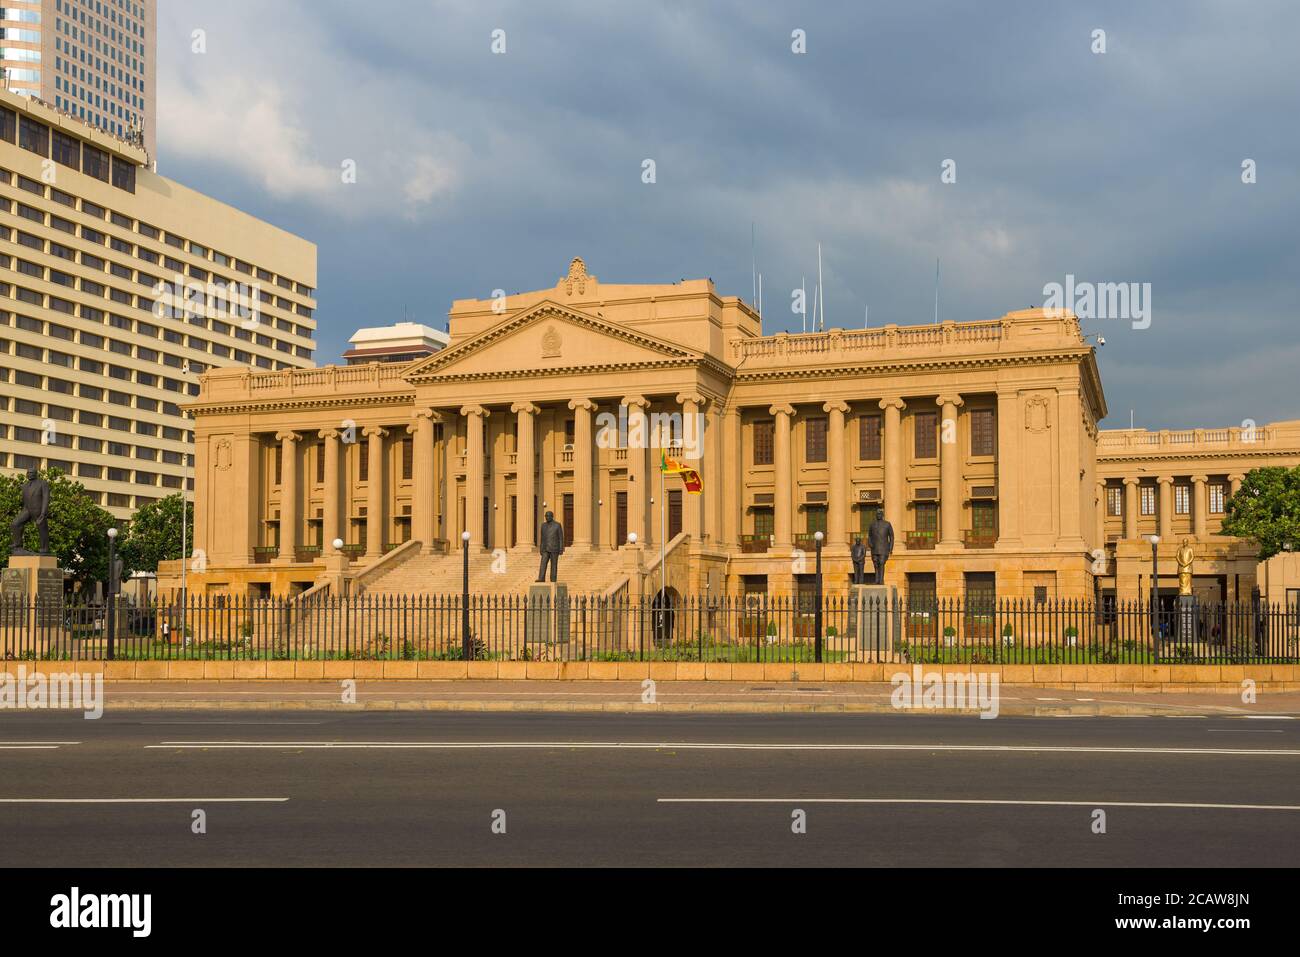 COLOMBO, SRI LANKA - FEBRUARY 21, 2020: View of the old Parliament building on a sunny evening Stock Photo